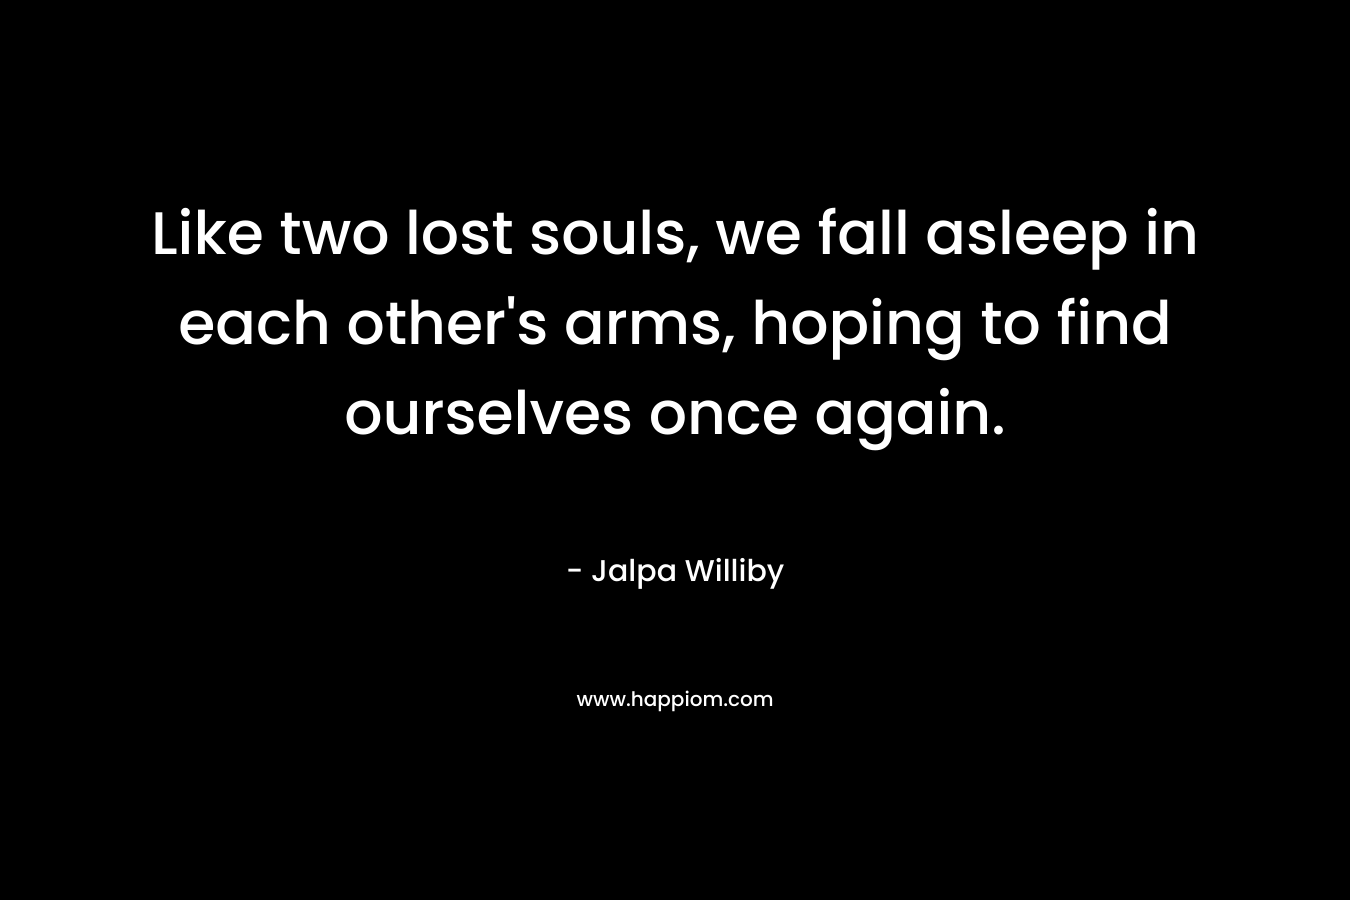 Like two lost souls, we fall asleep in each other’s arms, hoping to find ourselves once again. – Jalpa Williby